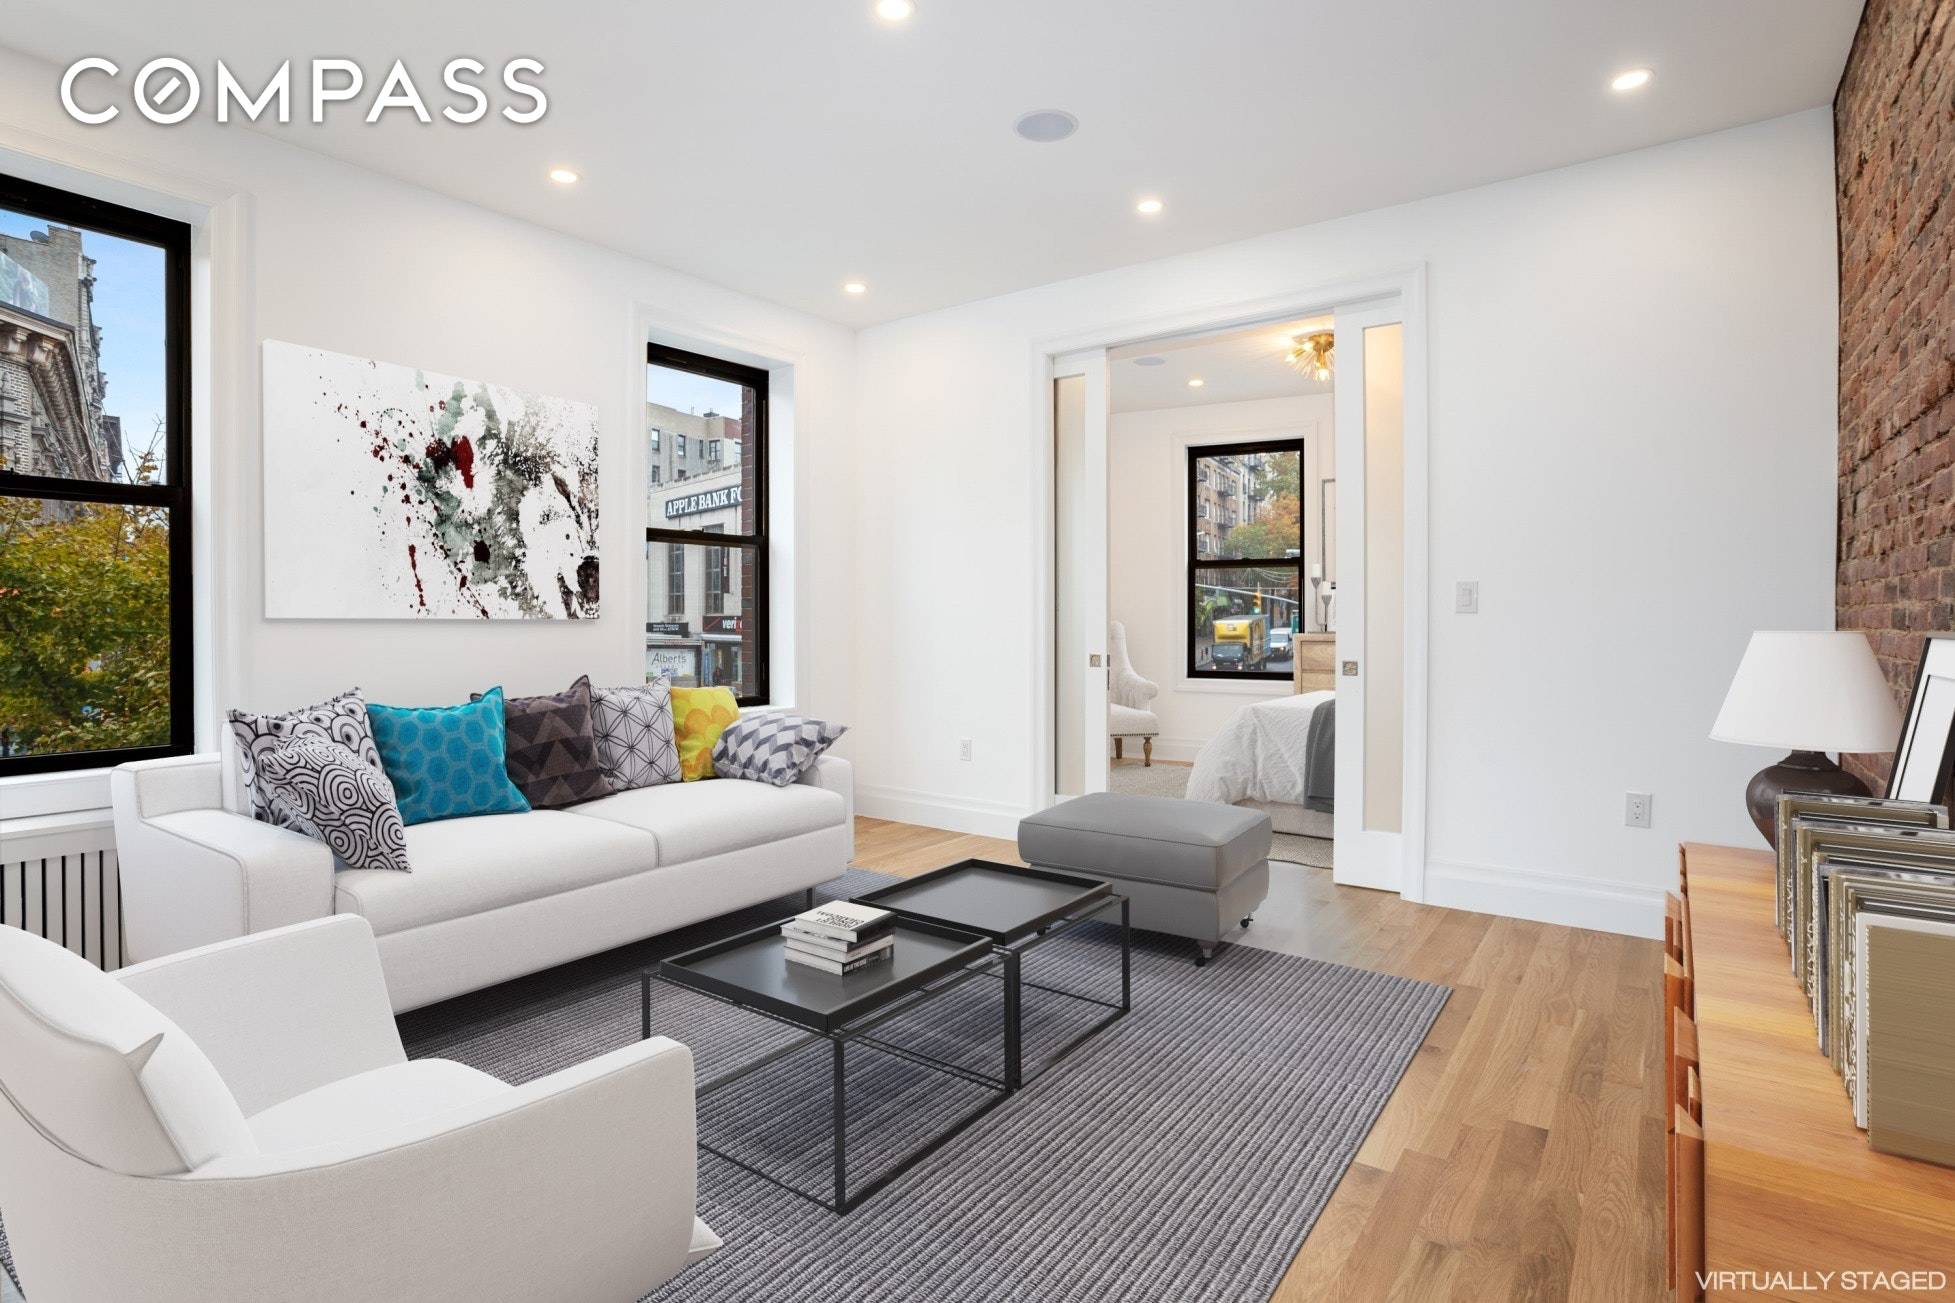 New to market ! Masterful design and modern luxury are uniquely embodied in this visually stunning two bedroom that I affectionately refer to as Residencia 200.